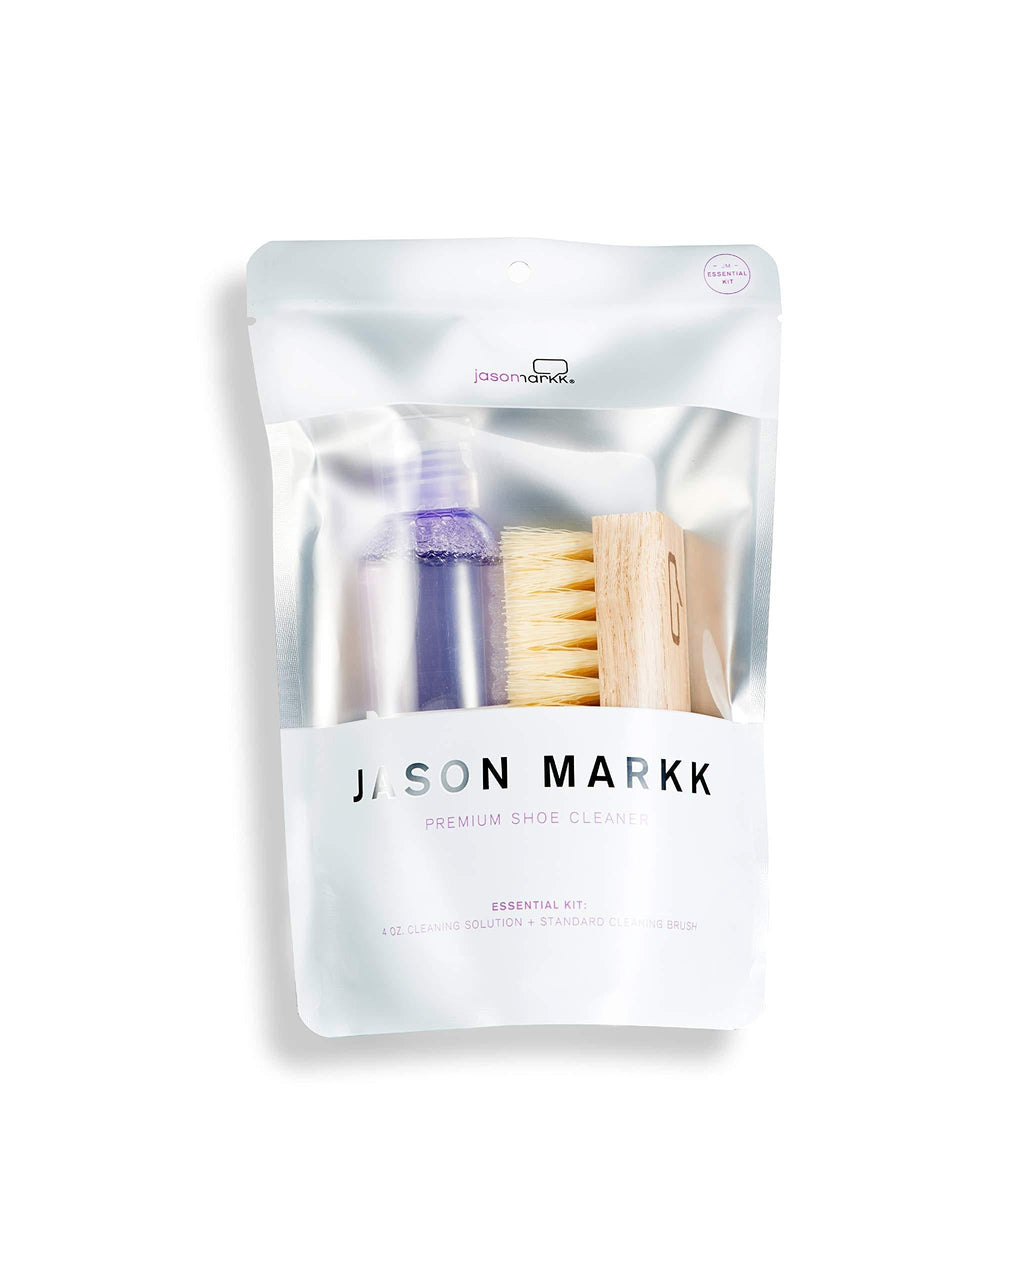 [Australia] - Jason Markk Essential Kit - 4 oz. Premium Shoe Cleaner & Standard Brush - Biodegradable and Free from Harsh Chemicals - Cleans and Conditions up to 100 pairs of Sneakers - Removes Dirt and Stains 